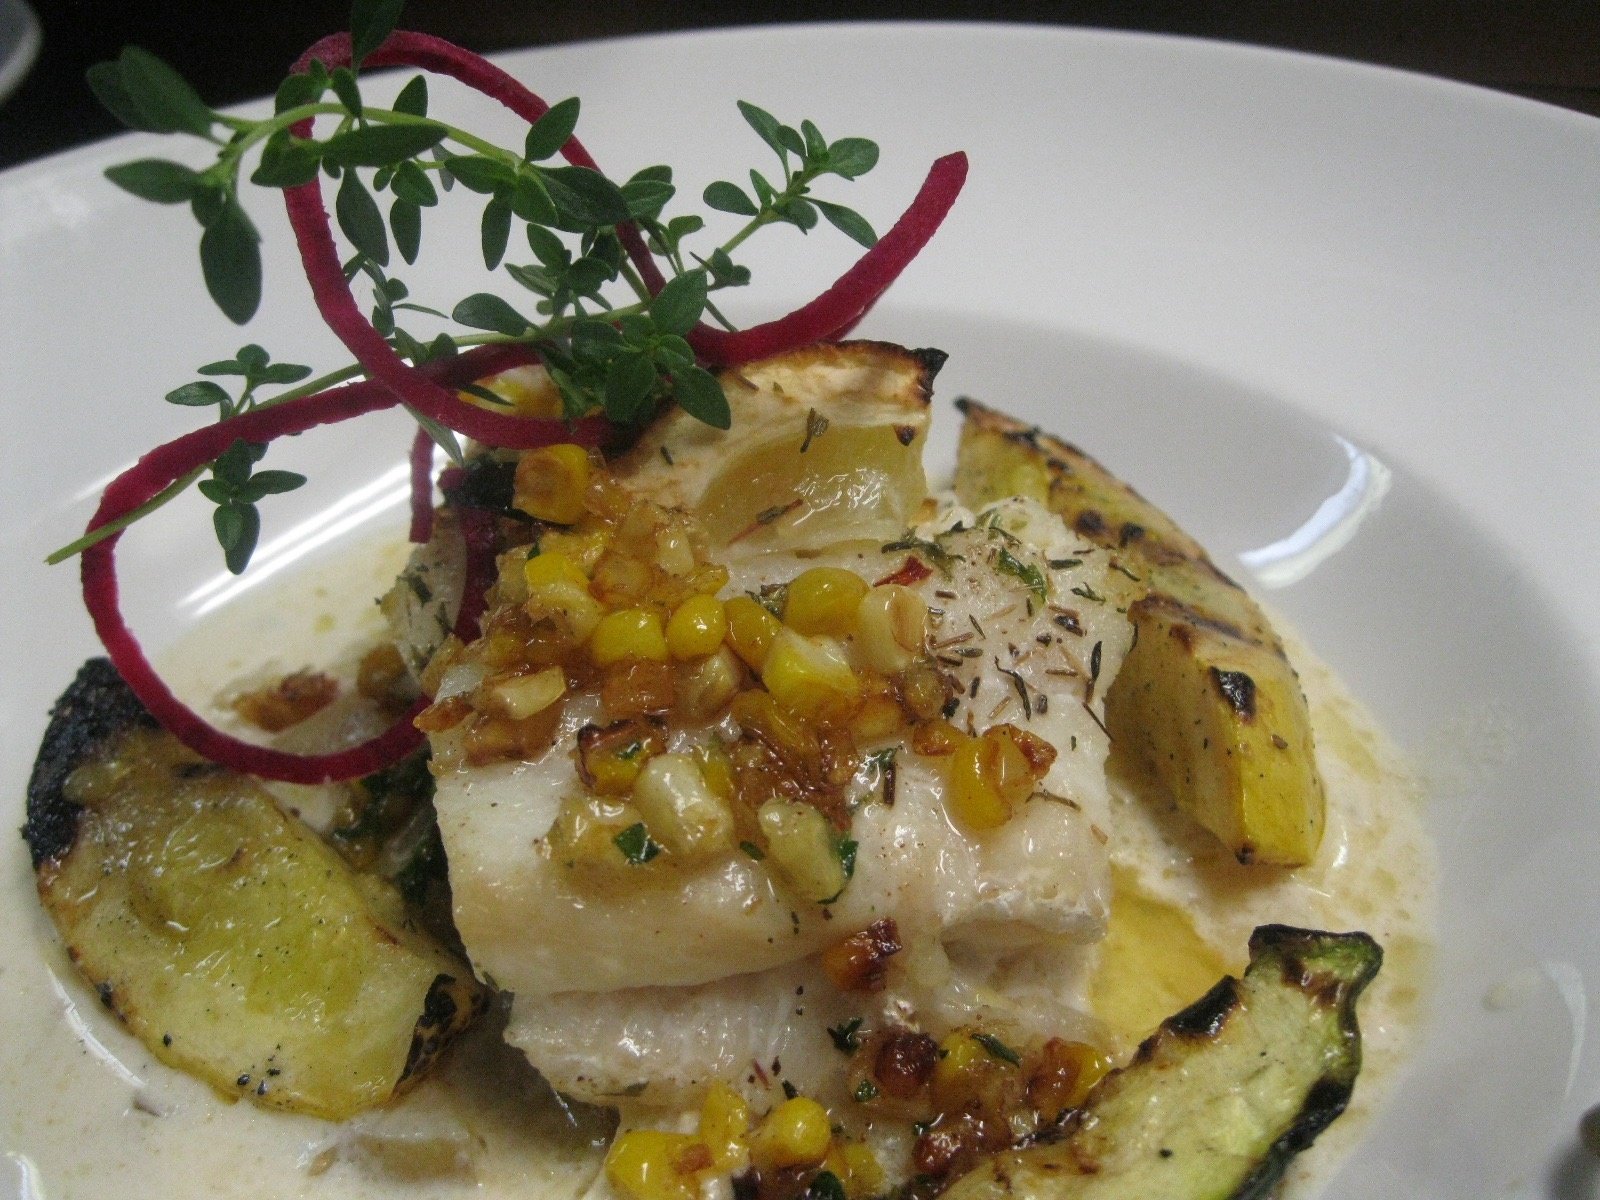 Grilled east coast halibut with a deconstructed new england chowder